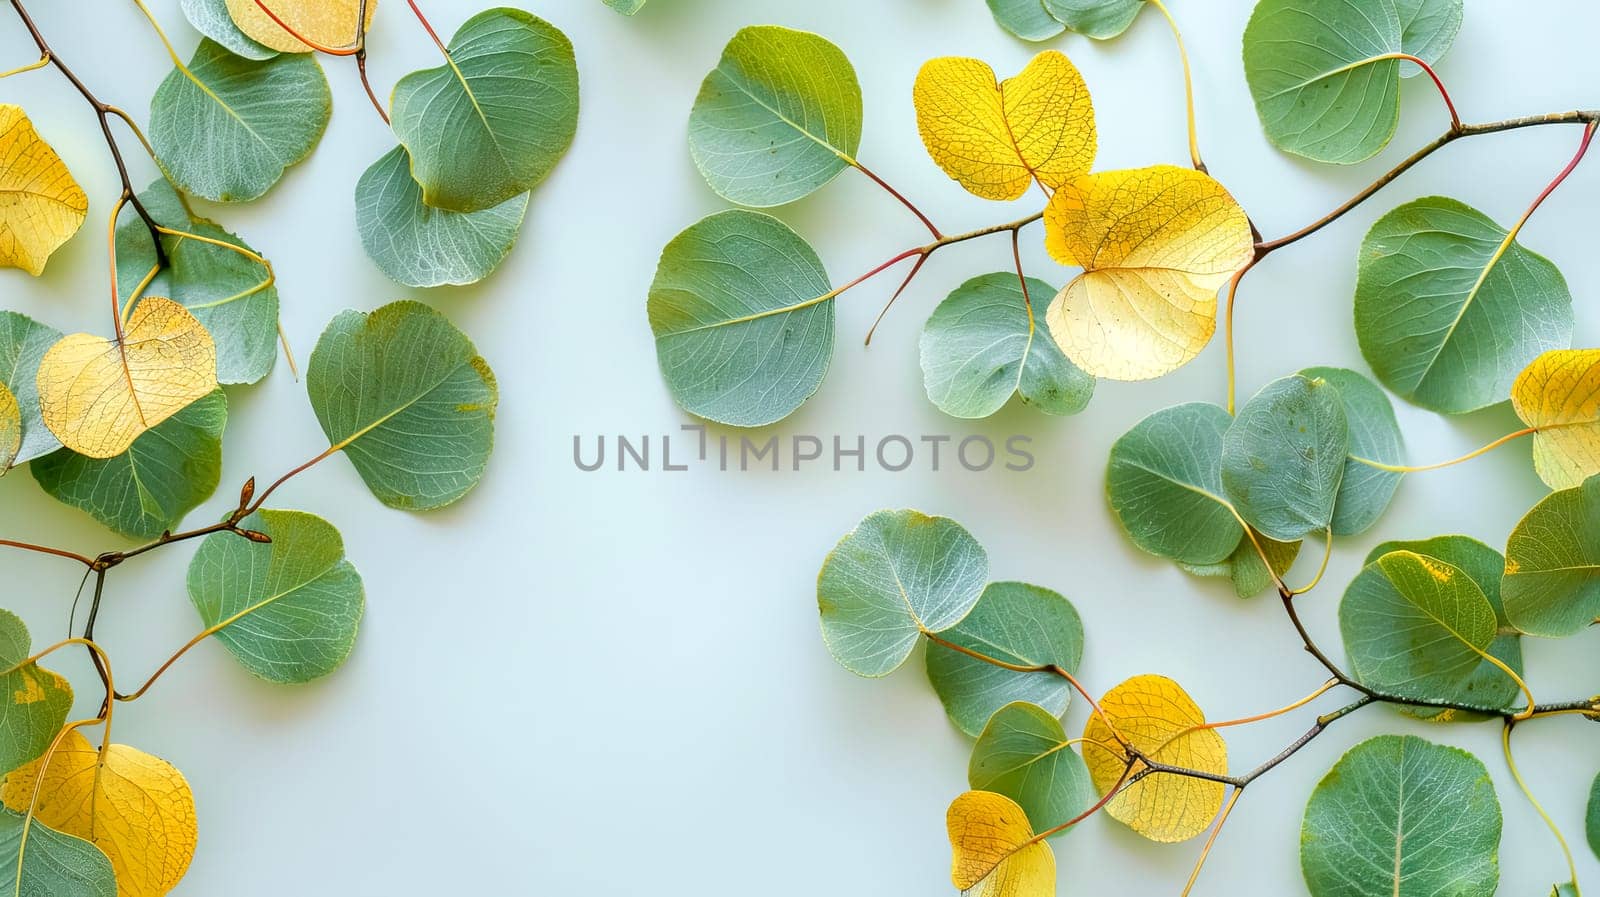 Eucalyptus branches with round leaves arranged on a white background with space for text